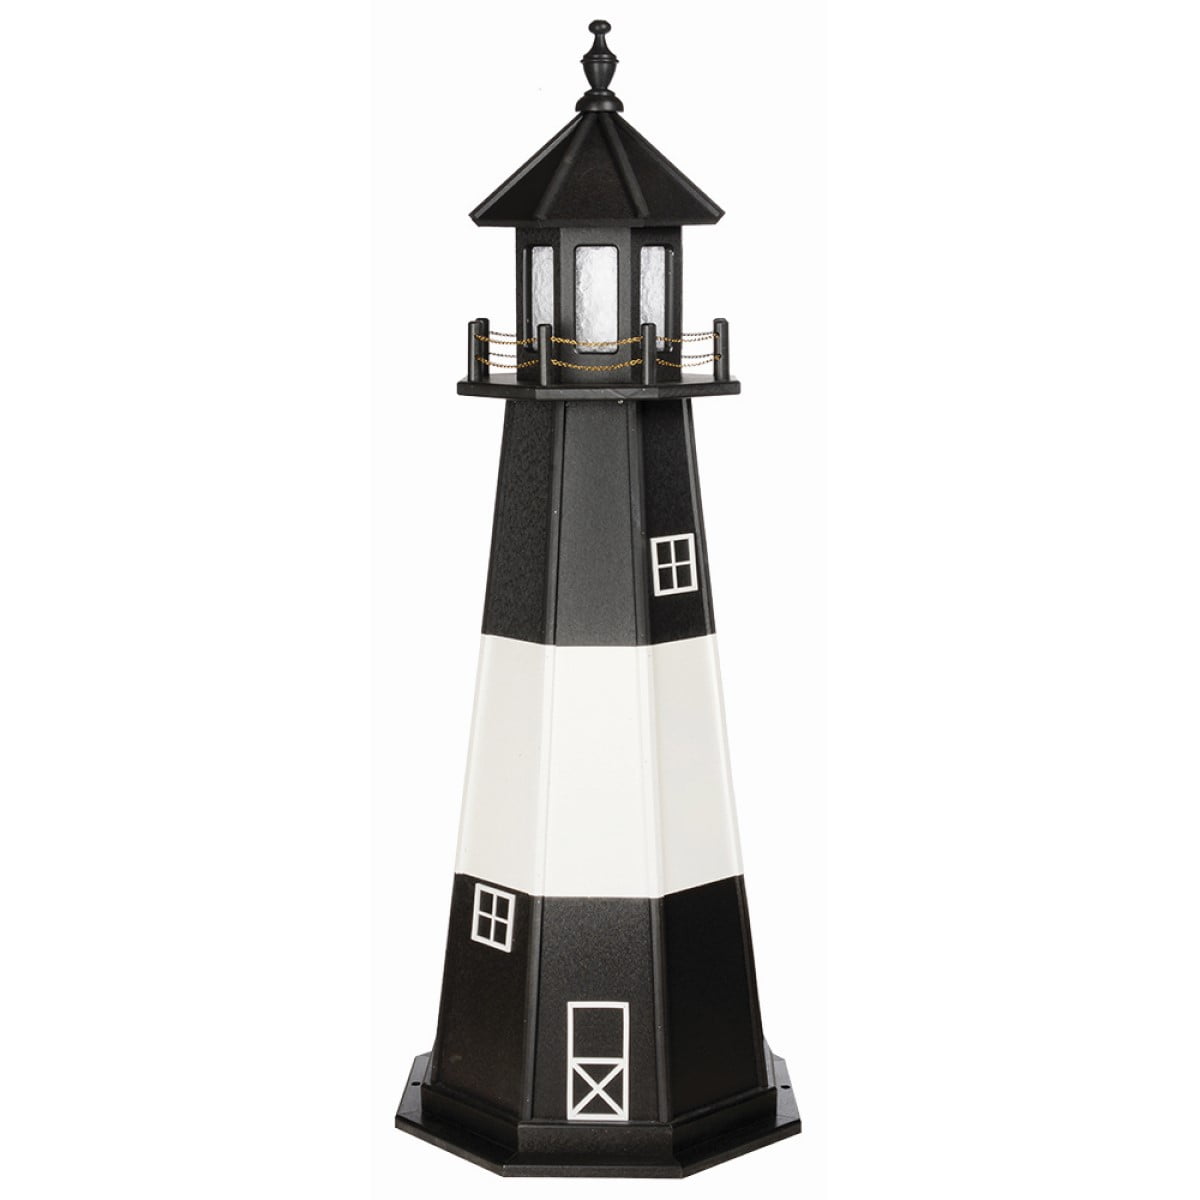 Beaver Dam Woodworks Tybee Island Poly Lumber Lighthouse-Replica-Multiple Sizes